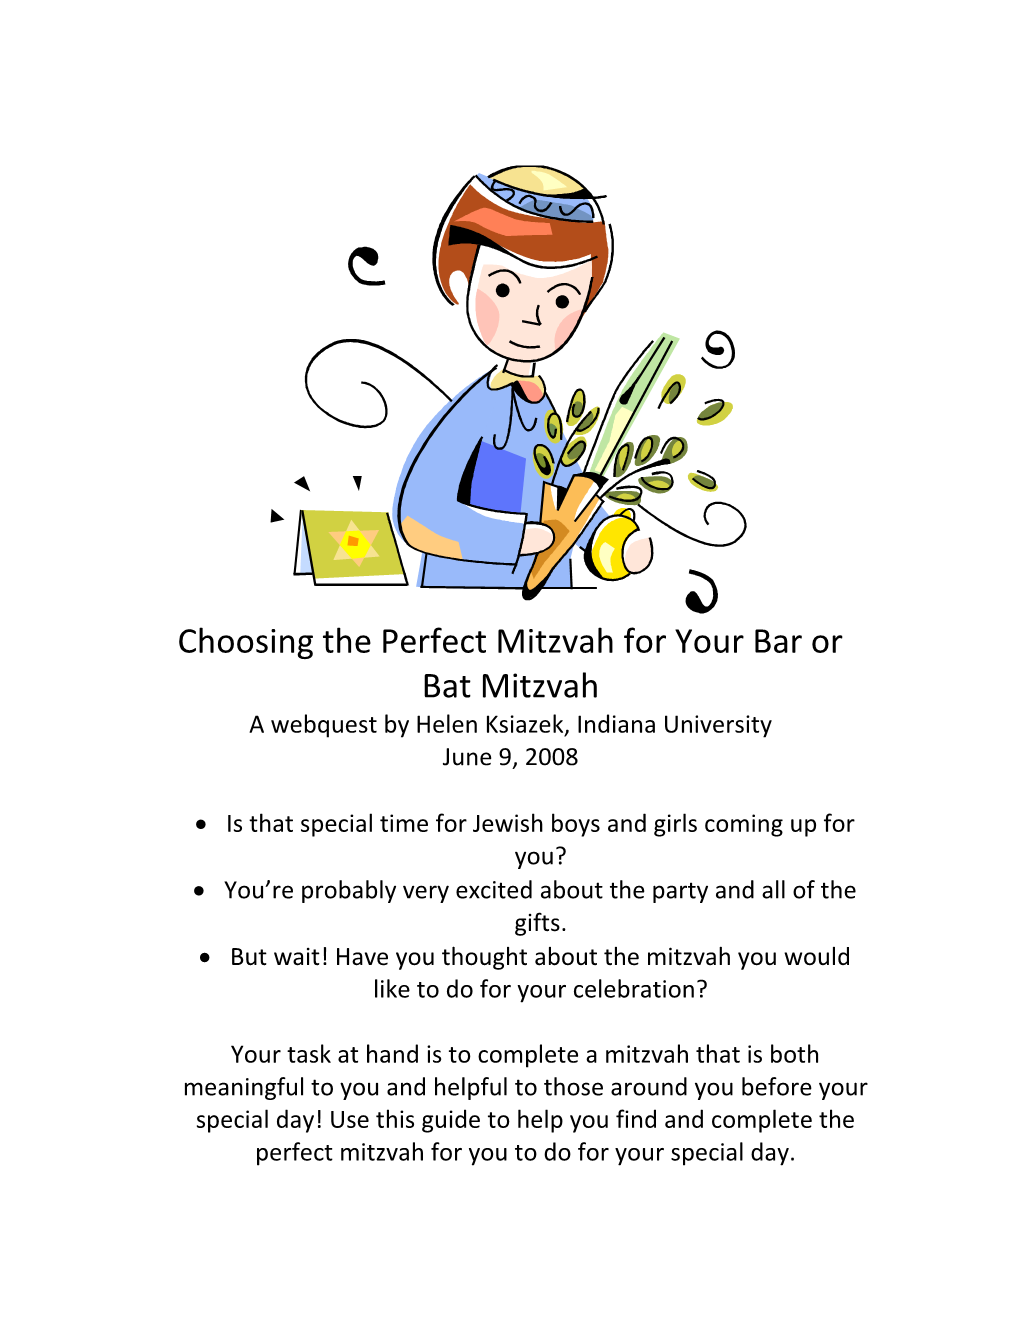 Choosing the Perfect Mitzvah for Your Bar Or Bat Mitzvah